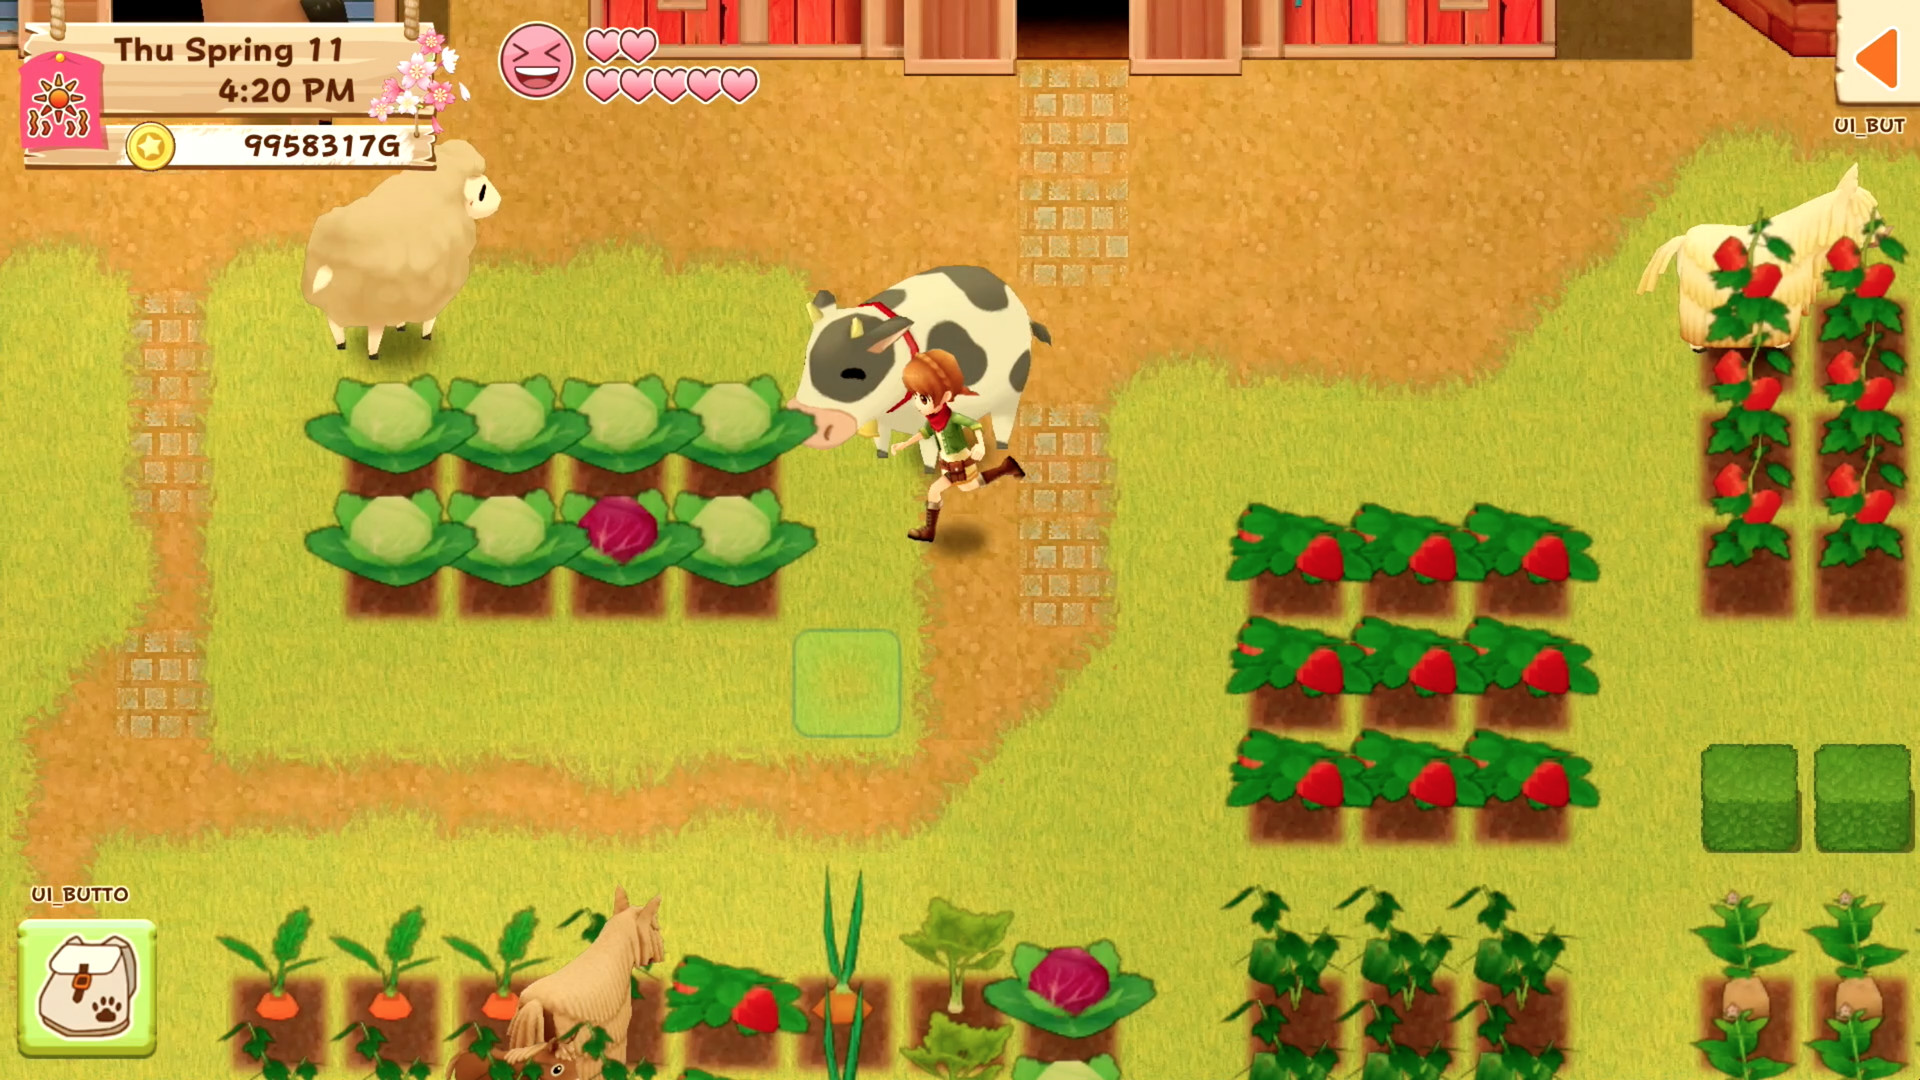 Natsume Opens Up About Harvest Moon S Confusing Past And Hopeful Future Pc Gamer